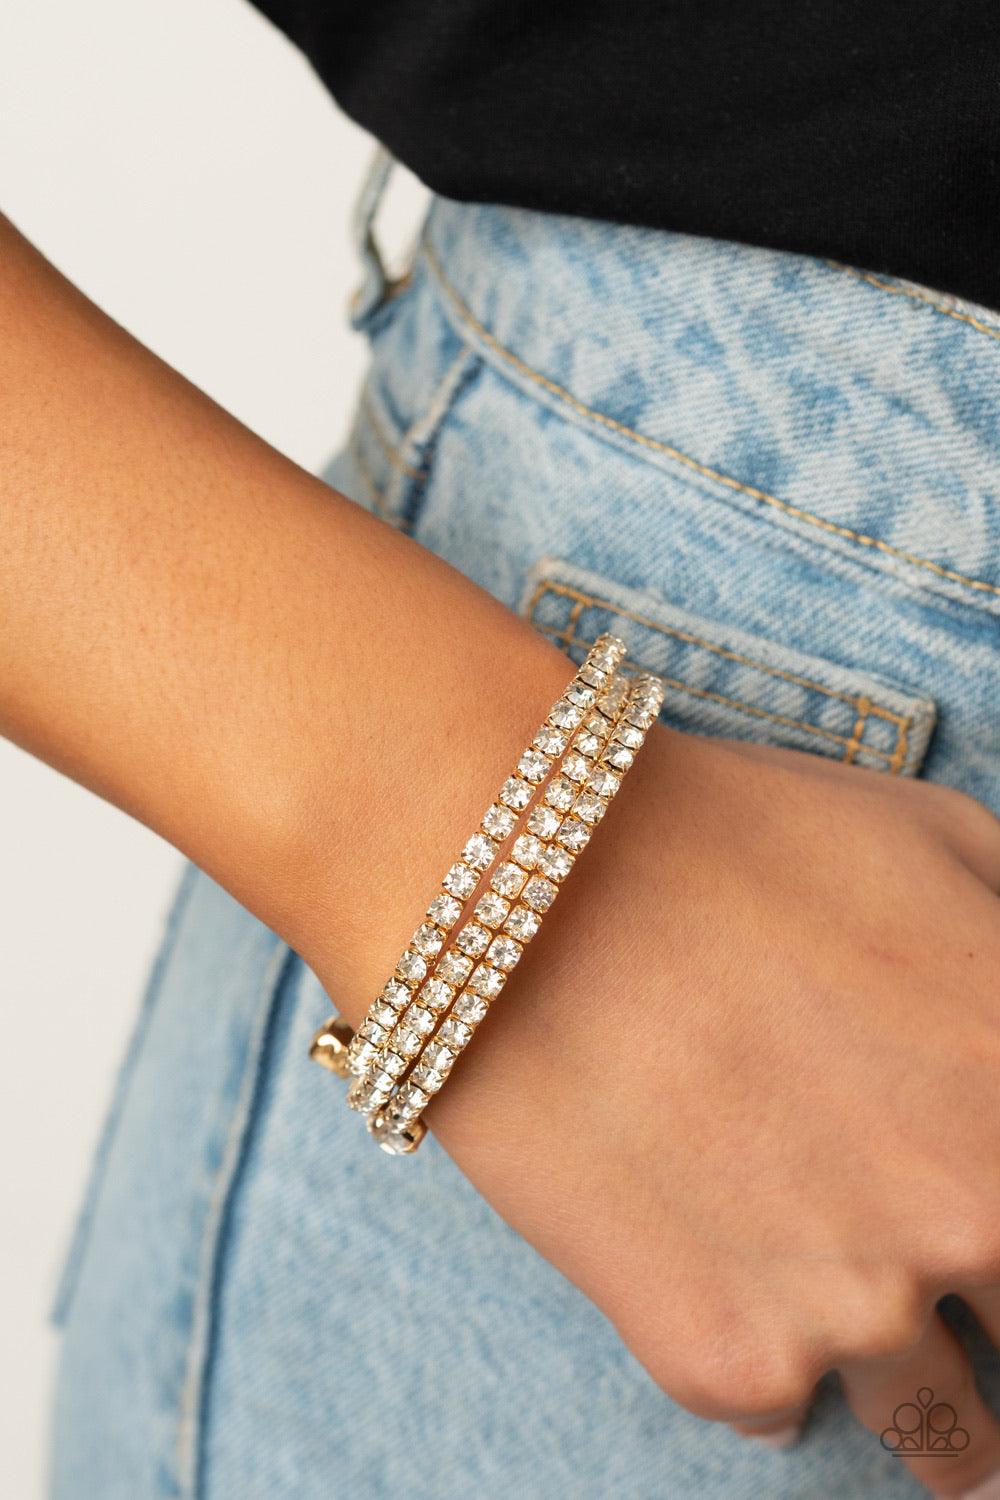 Paparazzi Accessories After Party Princess - Gold Featuring two oversized white rhinestone fittings, a glittery collection of white rhinestone encrusted gold frames are threaded along a gold wire around the wrist, creating a glamorous infinity wrap bracel